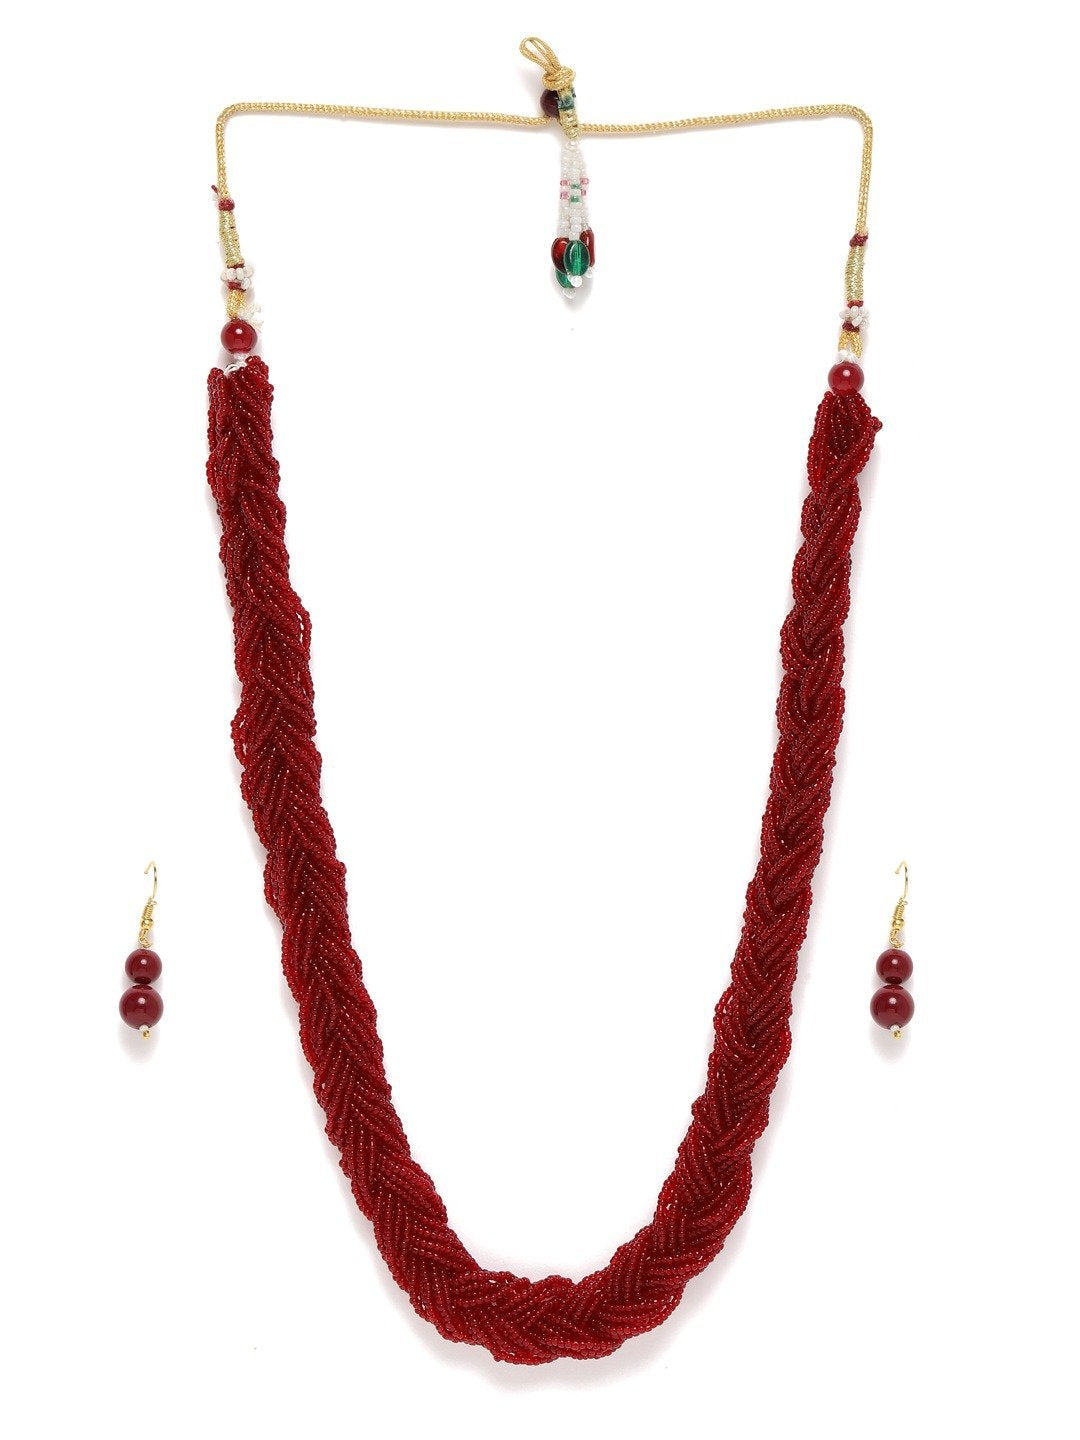 Women's Designer Ruby Twisted Beads Long Necklace Set With Earrings - i jewels